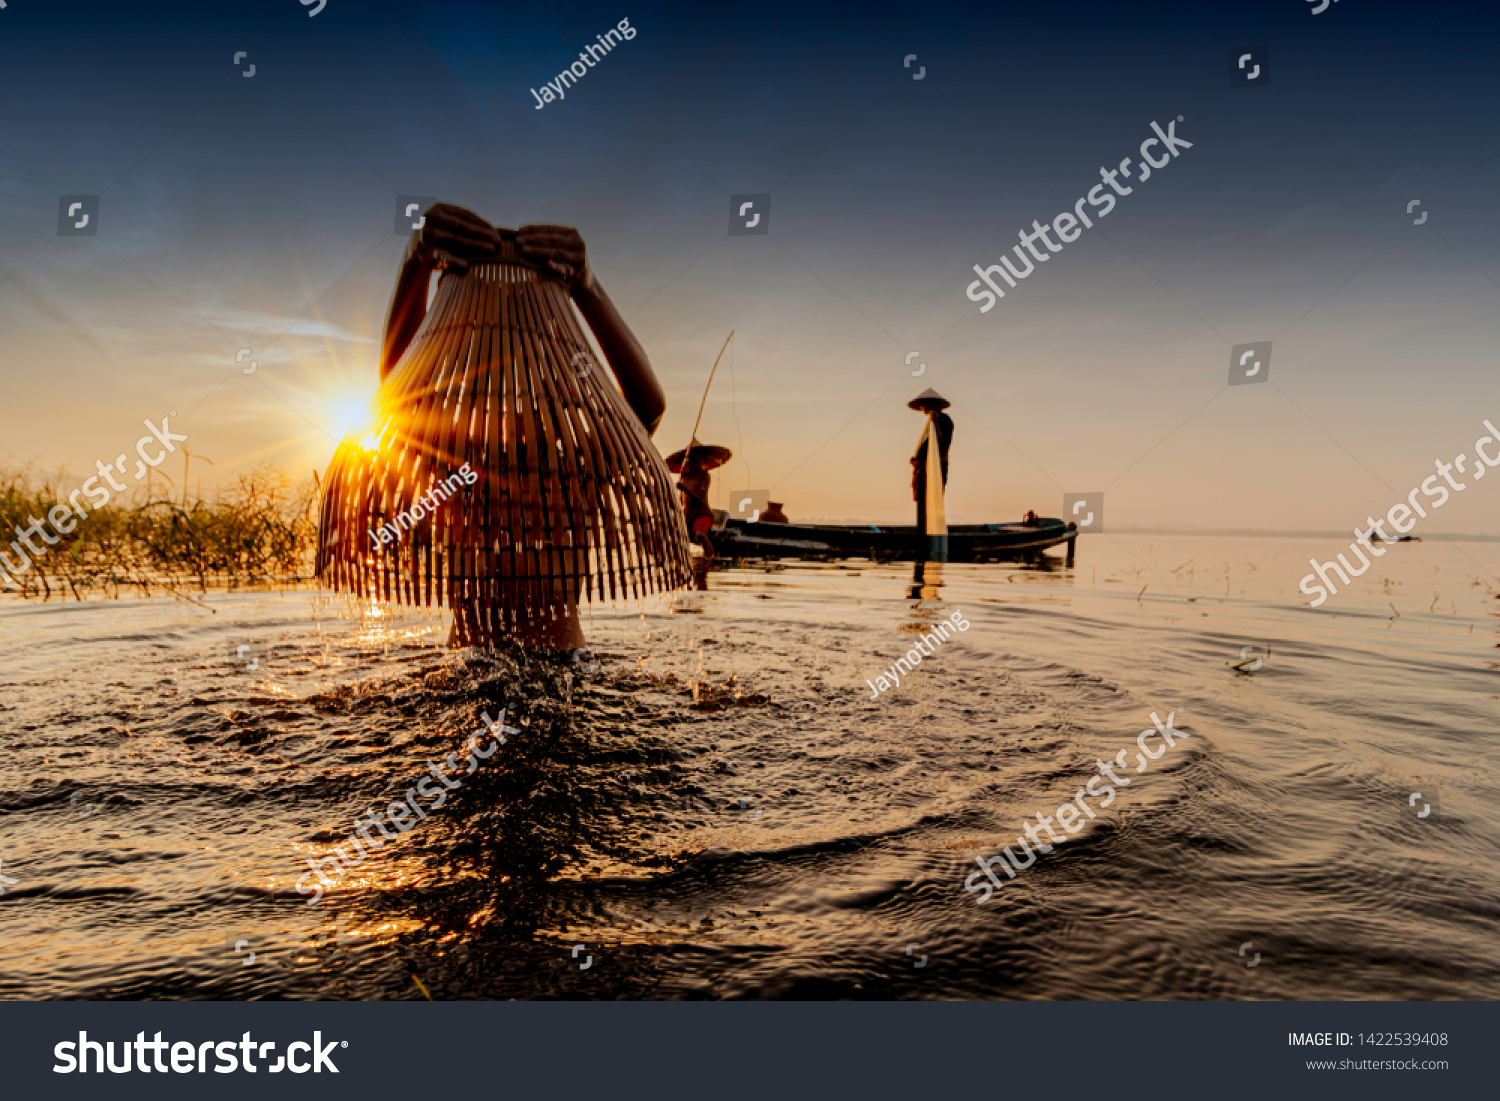 Image is silhouette. Fishermen Casting are going out to fish early in the morning with wooden boats, old lanterns and nets. Concept Fisherman's life style
 #1422539408